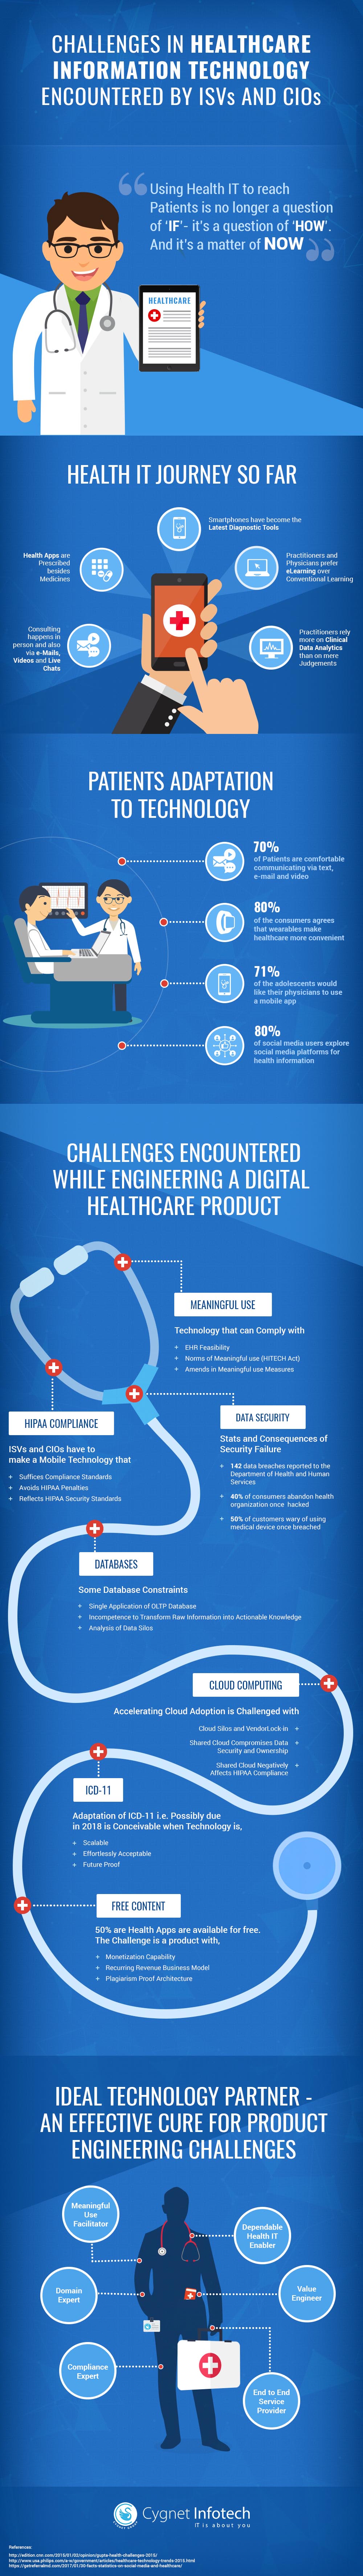 IT Challenges Encountered by Healthcare ISVs and CIOs